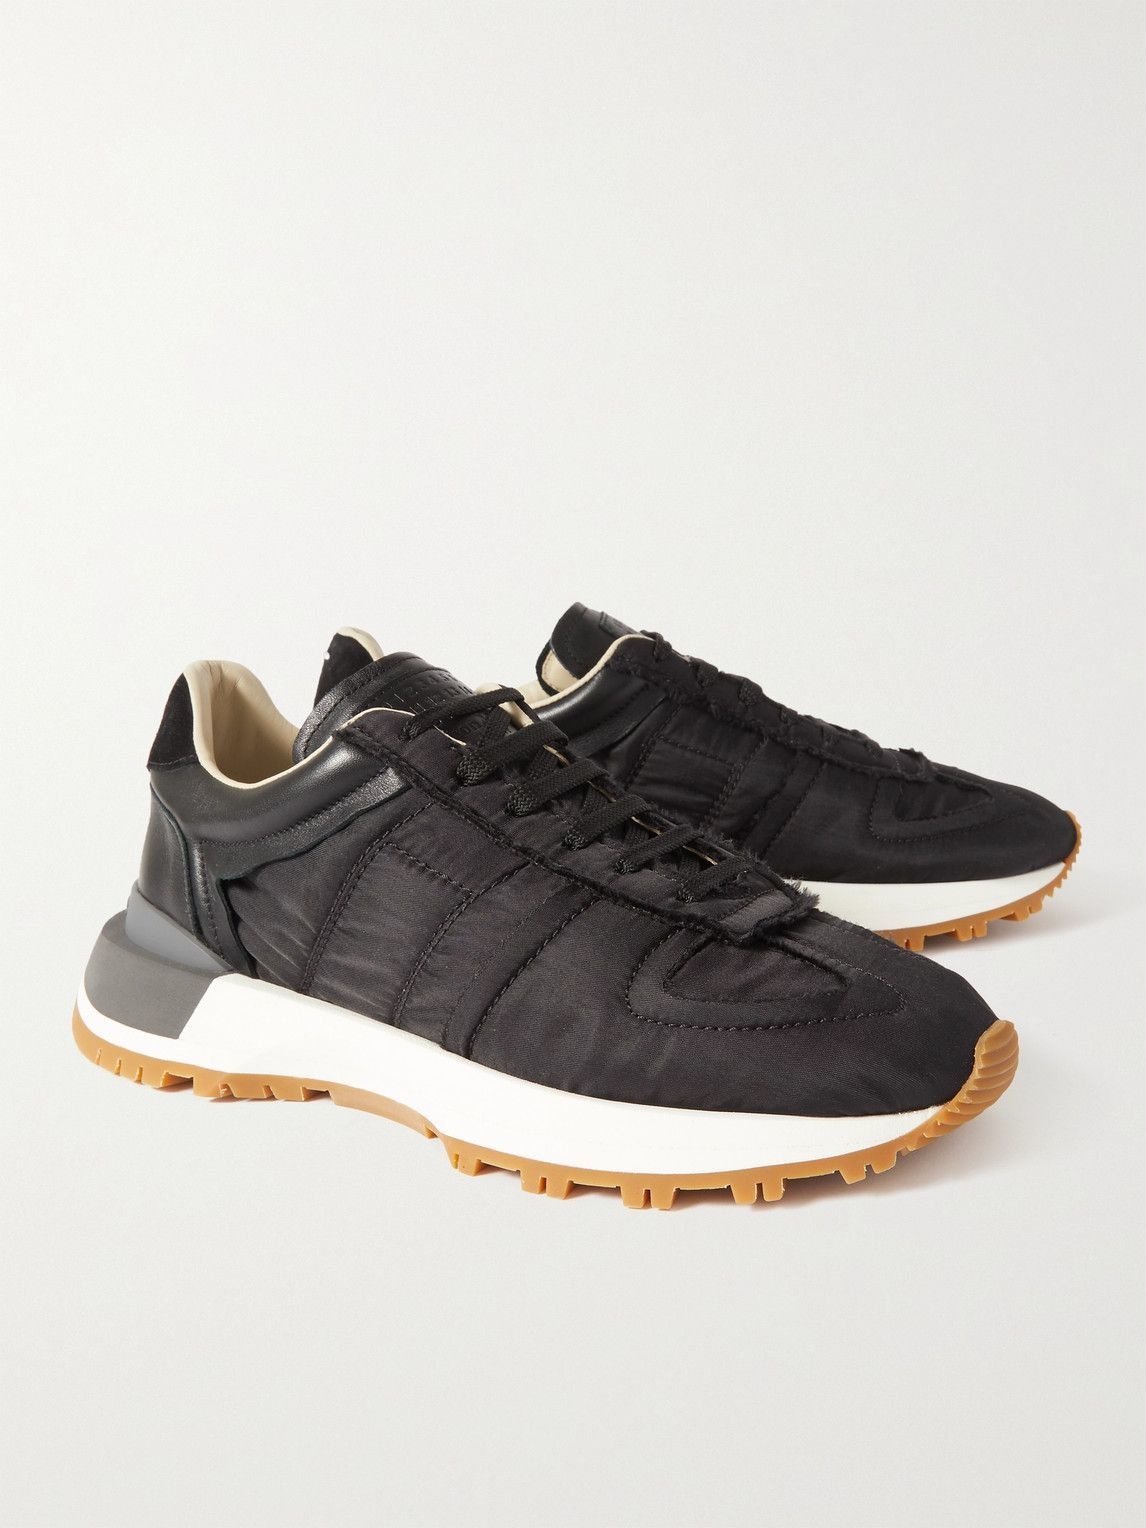 TOM FORD James Rubber-Trimmed Leather, Suede and Nylon Sneakers for Men |  MR PORTER